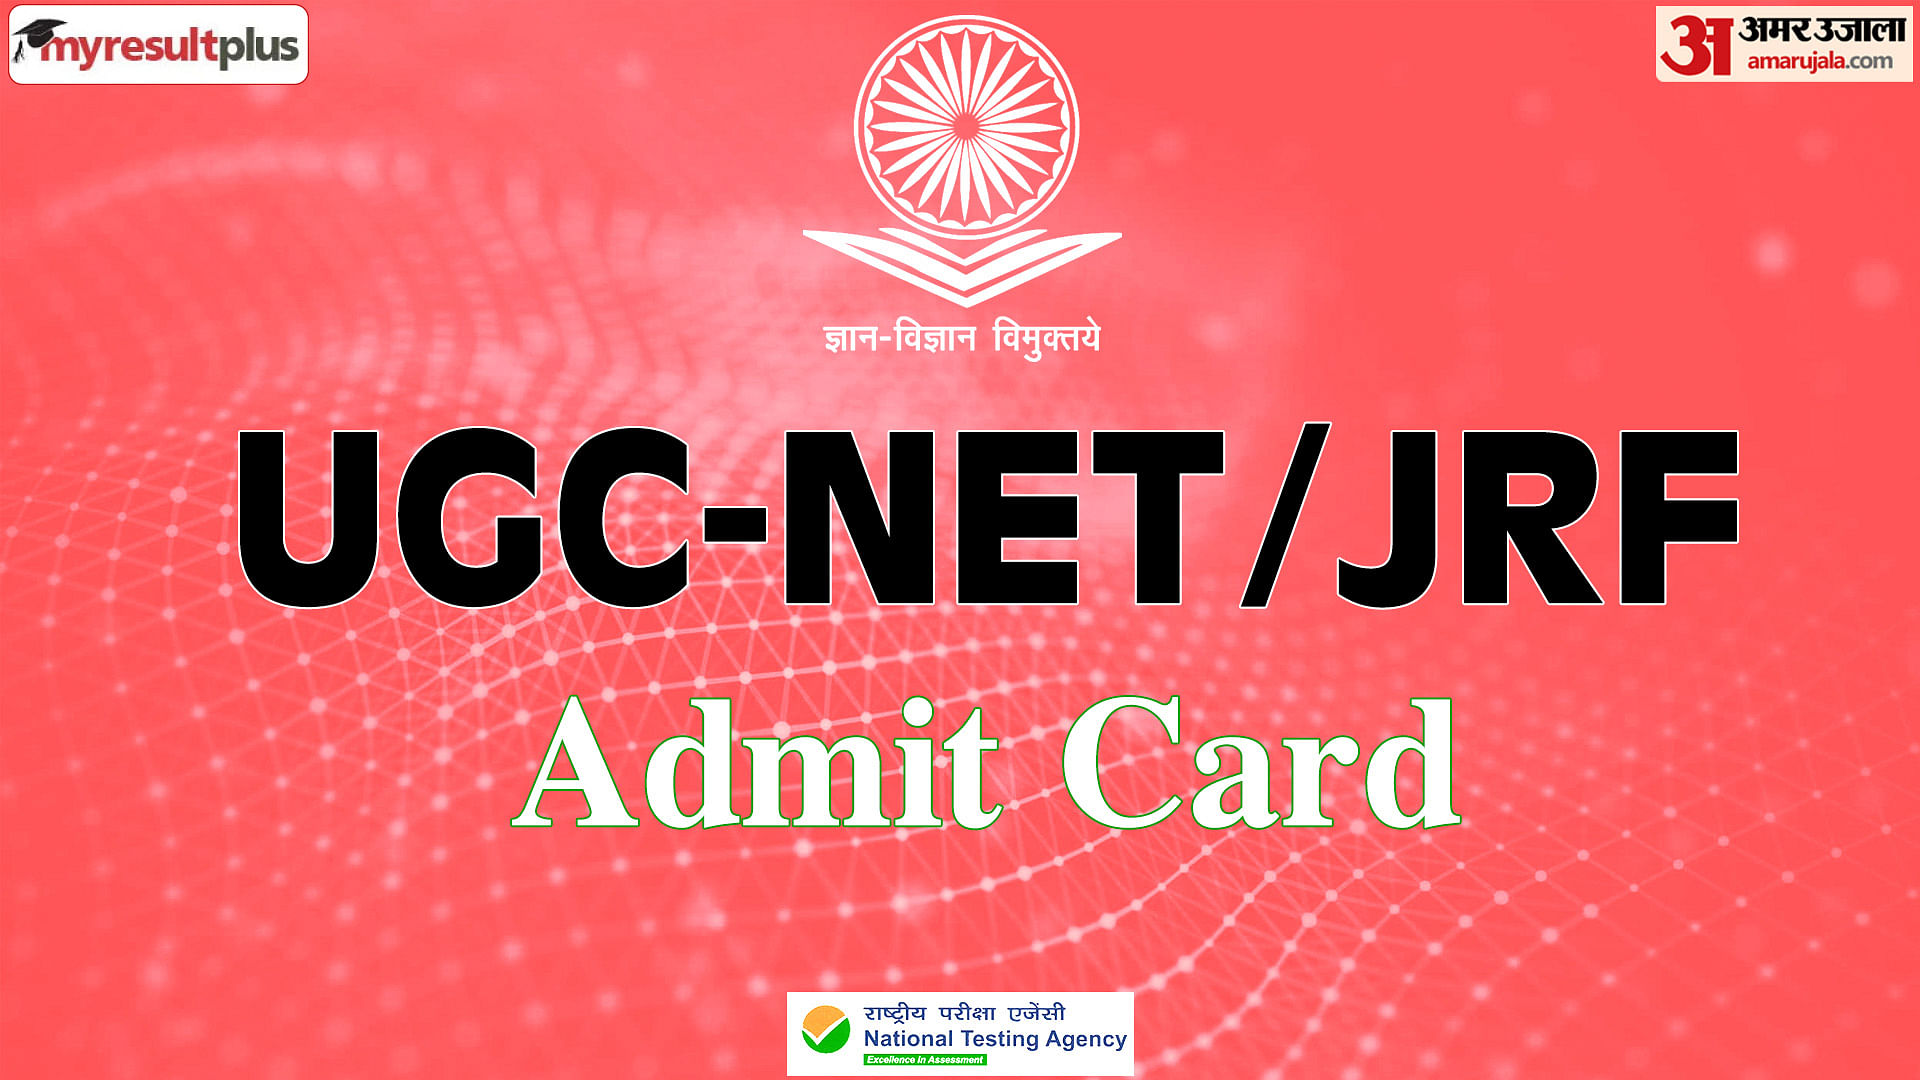 UGC NET 2022 : NTA Releases Admit Card For Merged Cycle December 2021-June 22, Get Direct Link Here